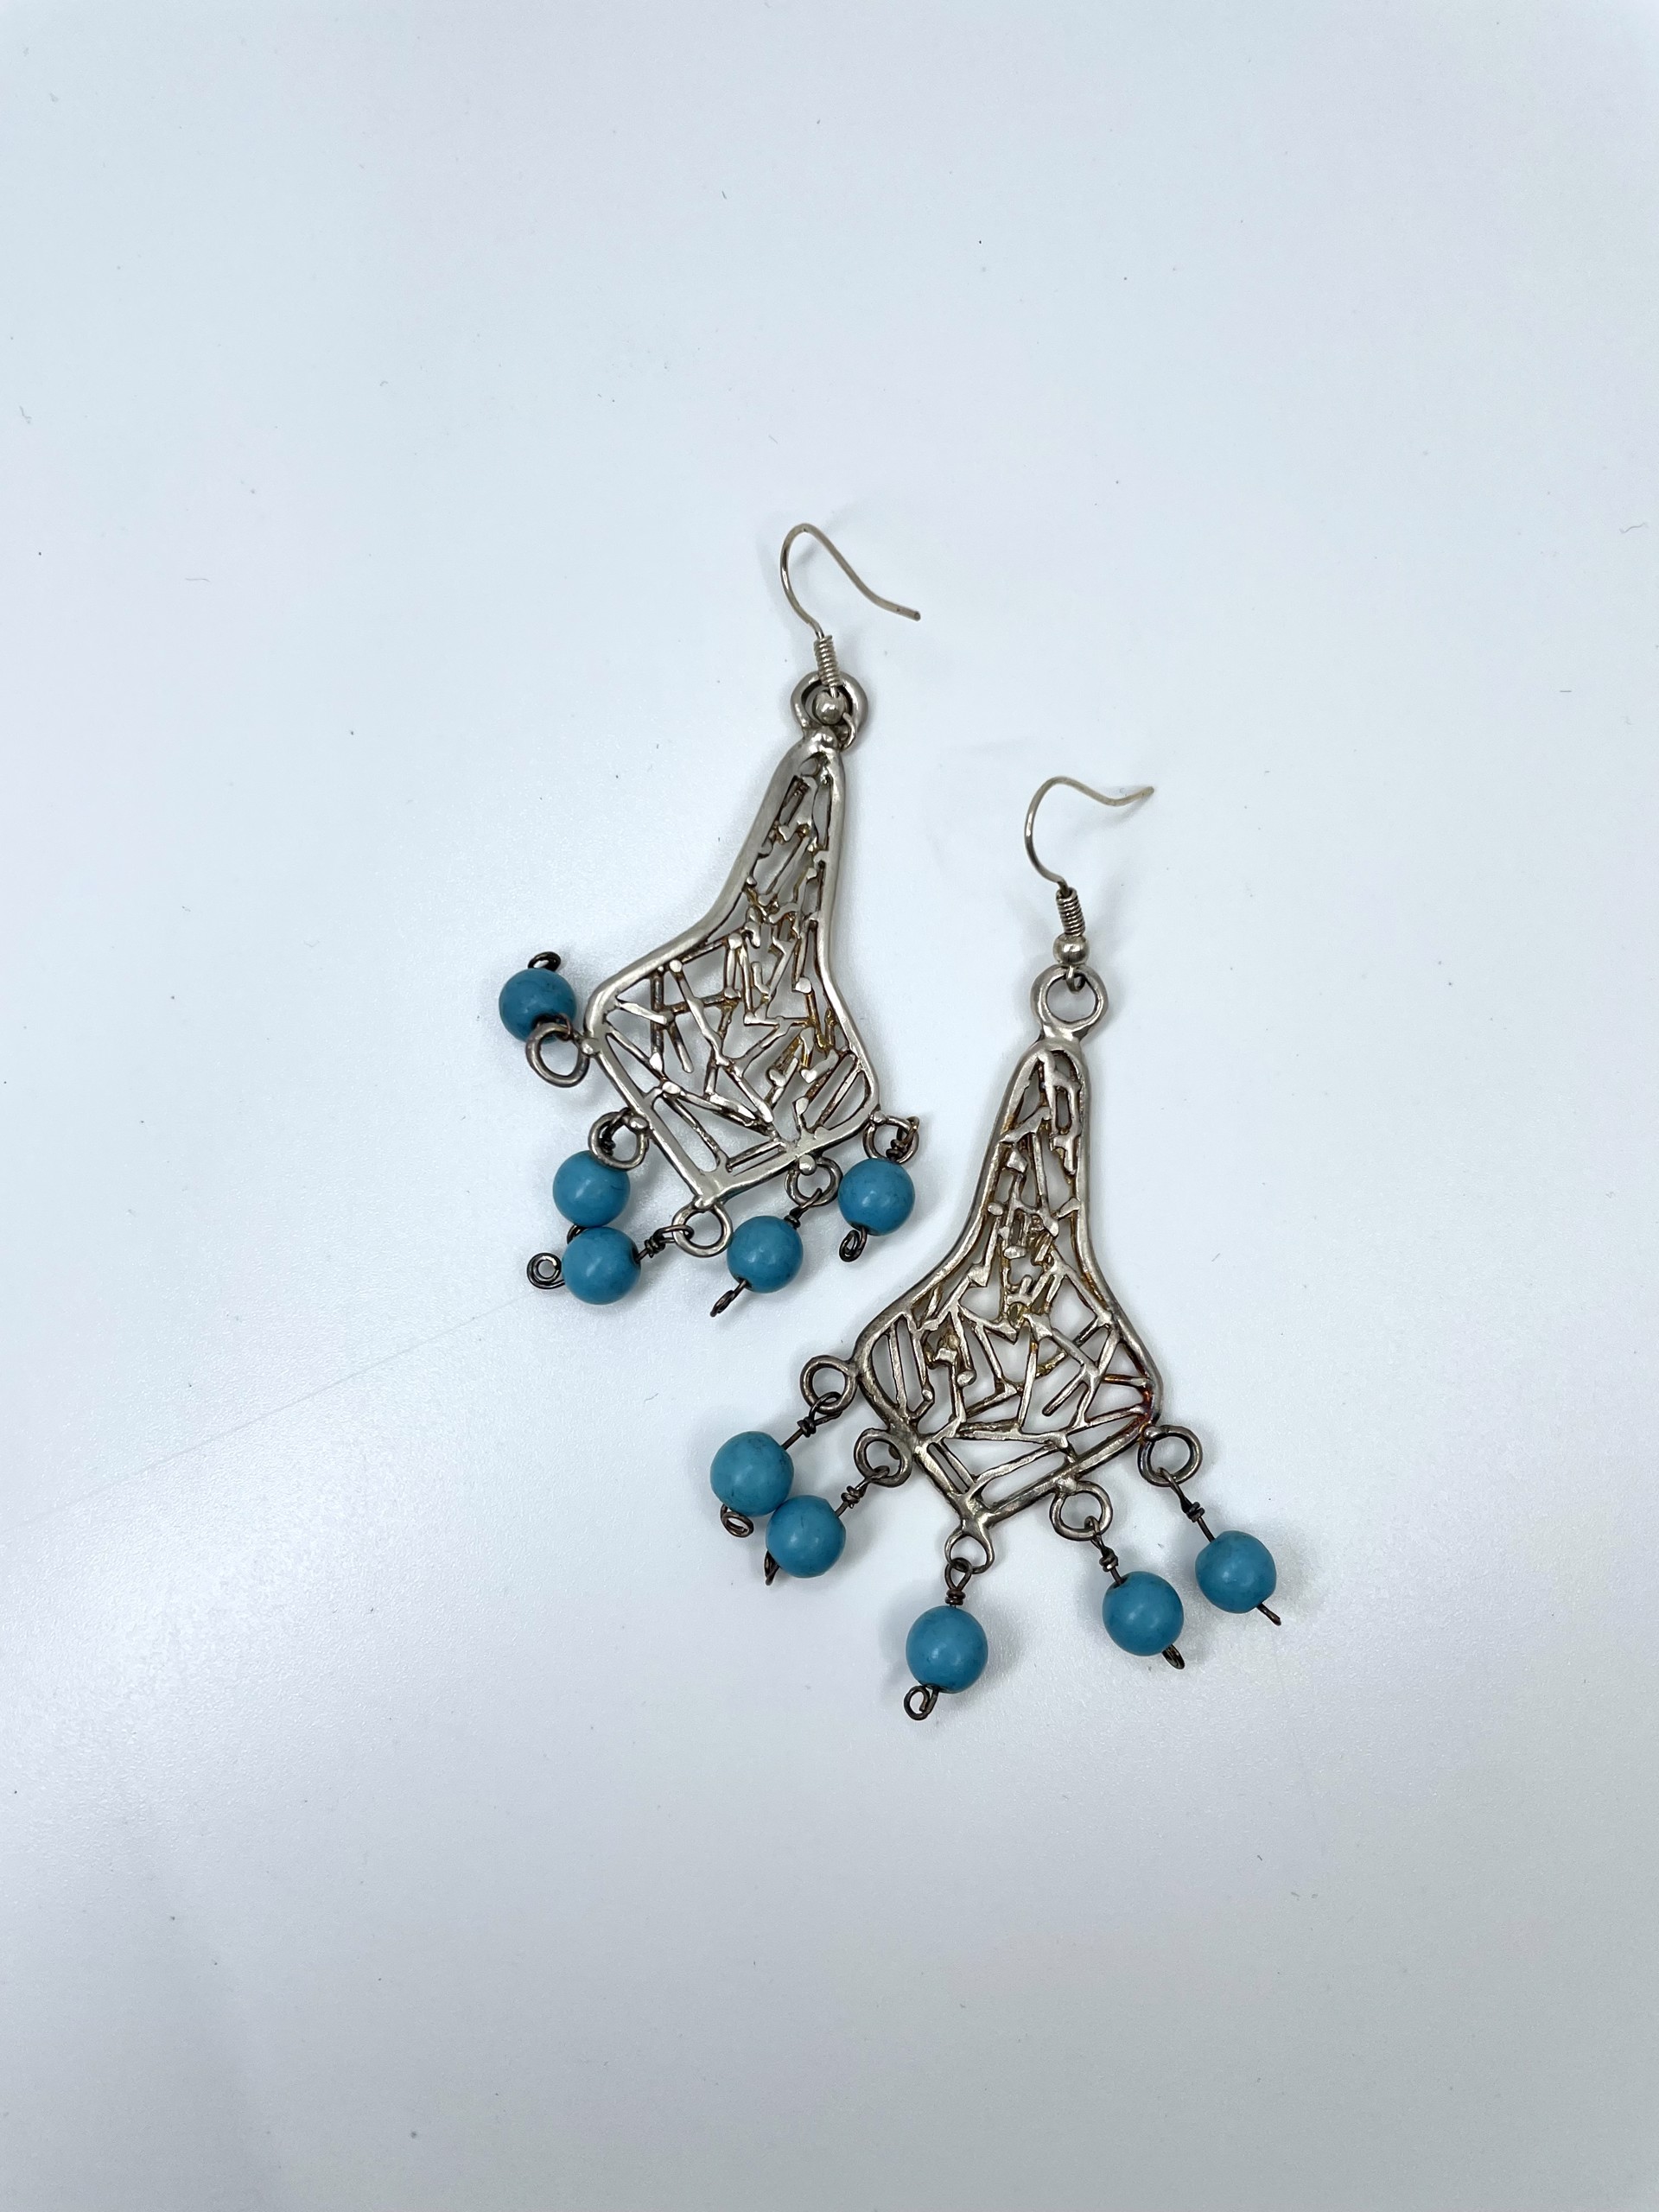 Curvy Shaped Earrings with Turquoise Beads by Beth Benowich